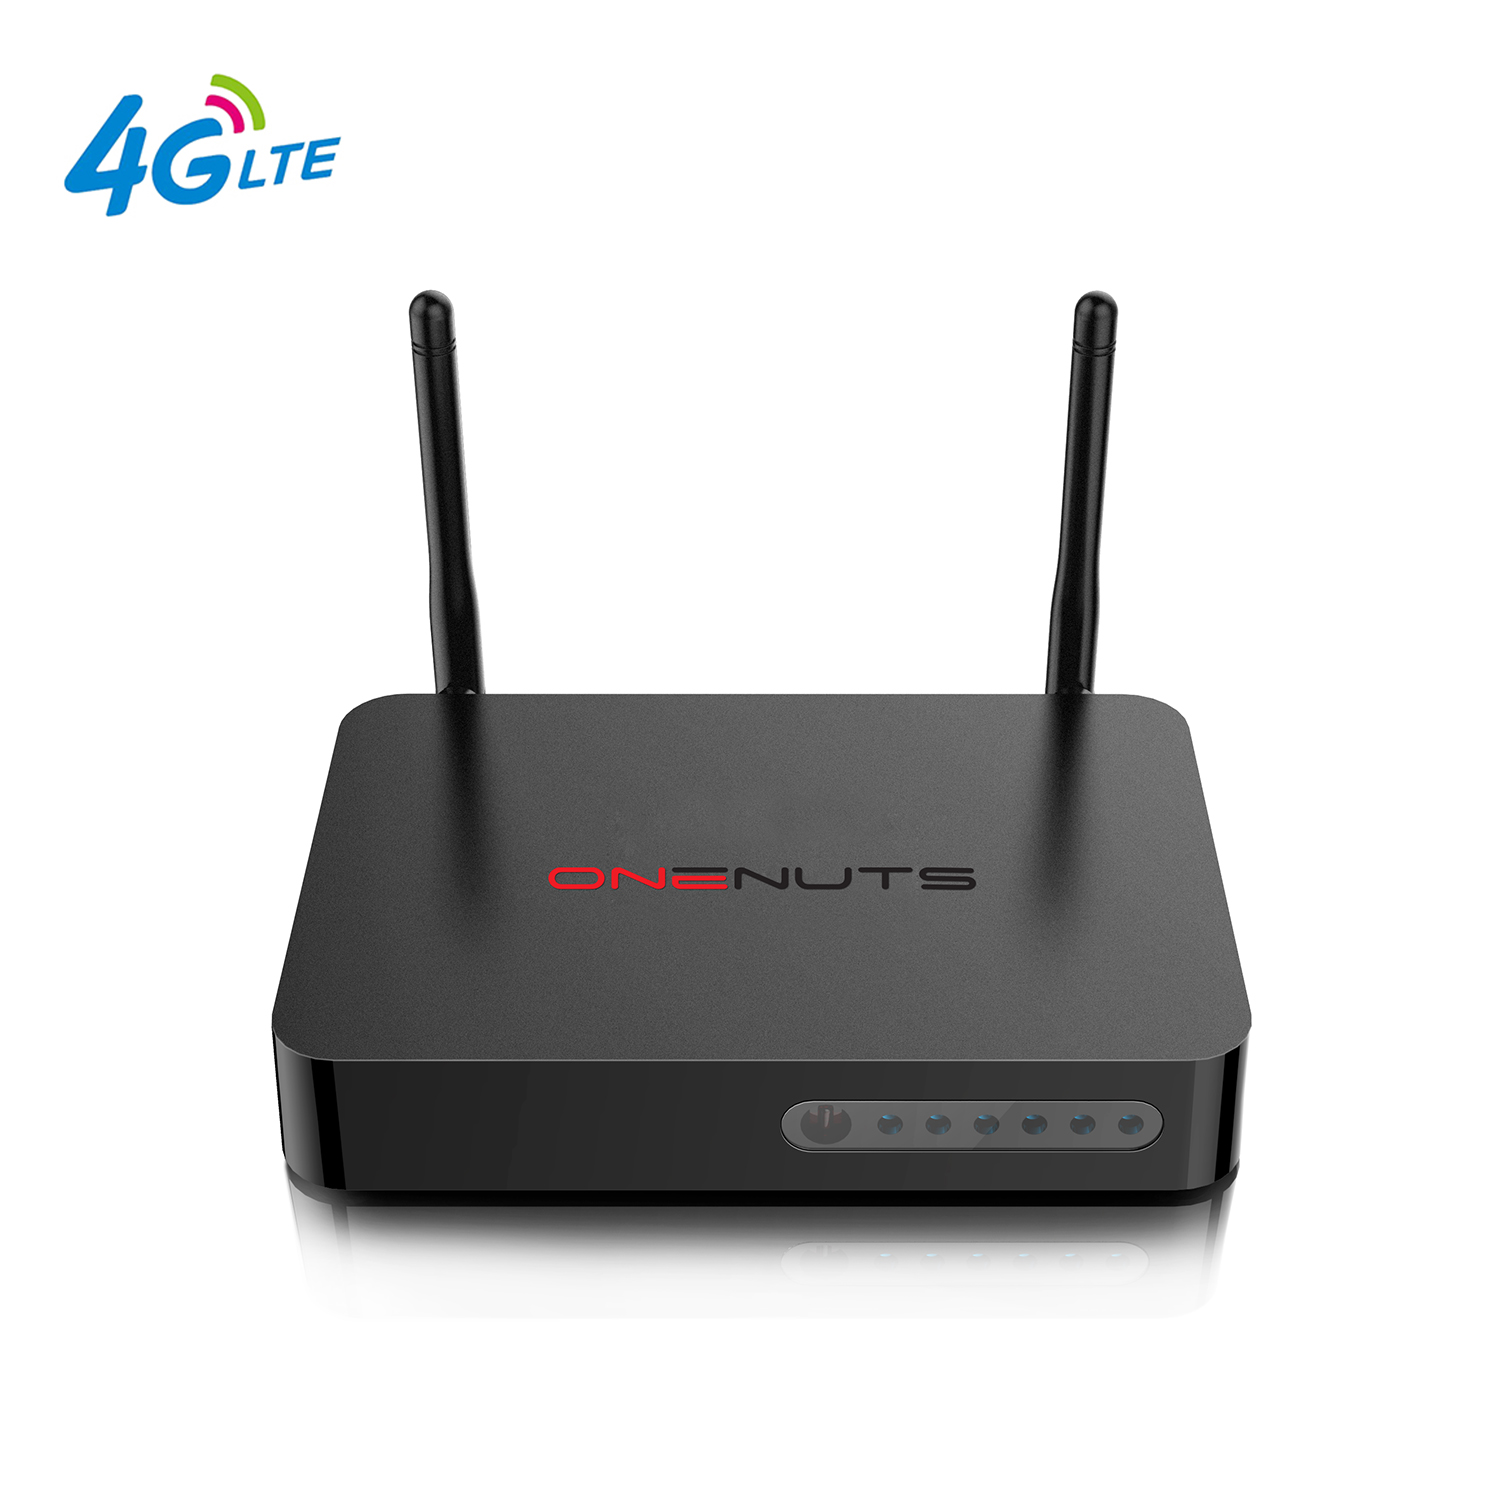 Smart Android TV Box، Android TV Box Huawei WCDMA مودم مدمج